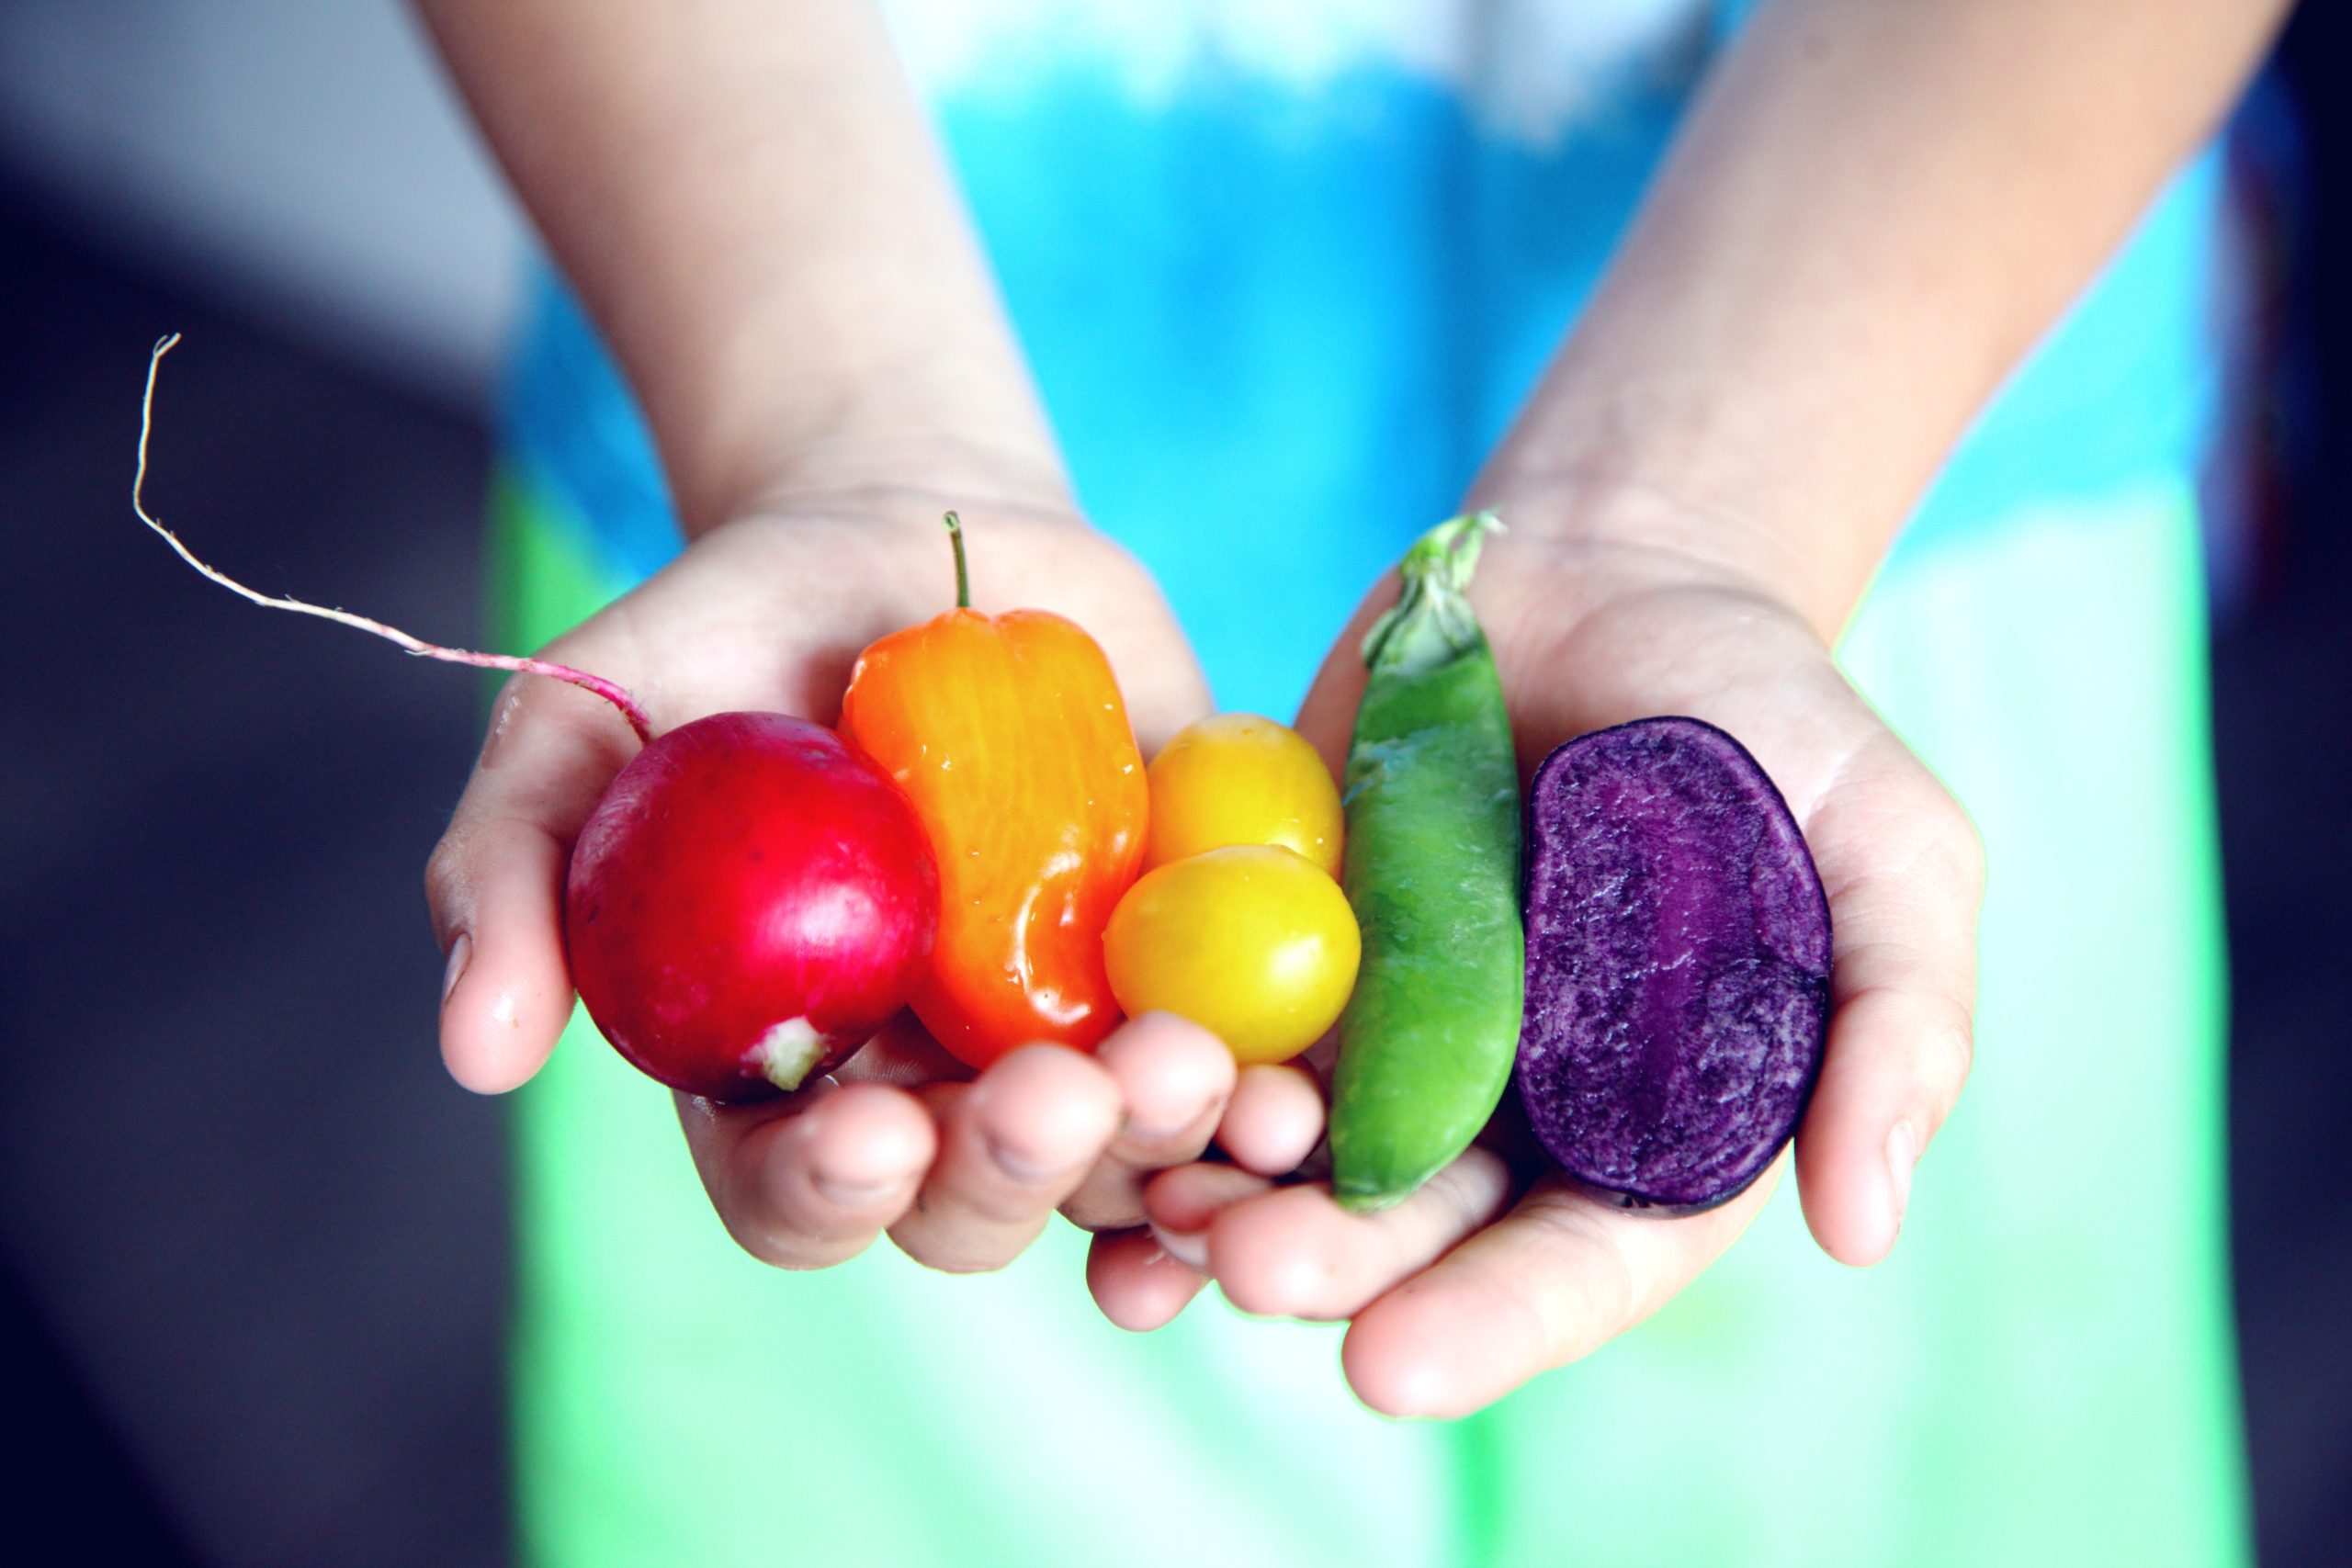 Two hands holding fruit and vegetables in red, orange, yellow, green and purple colours